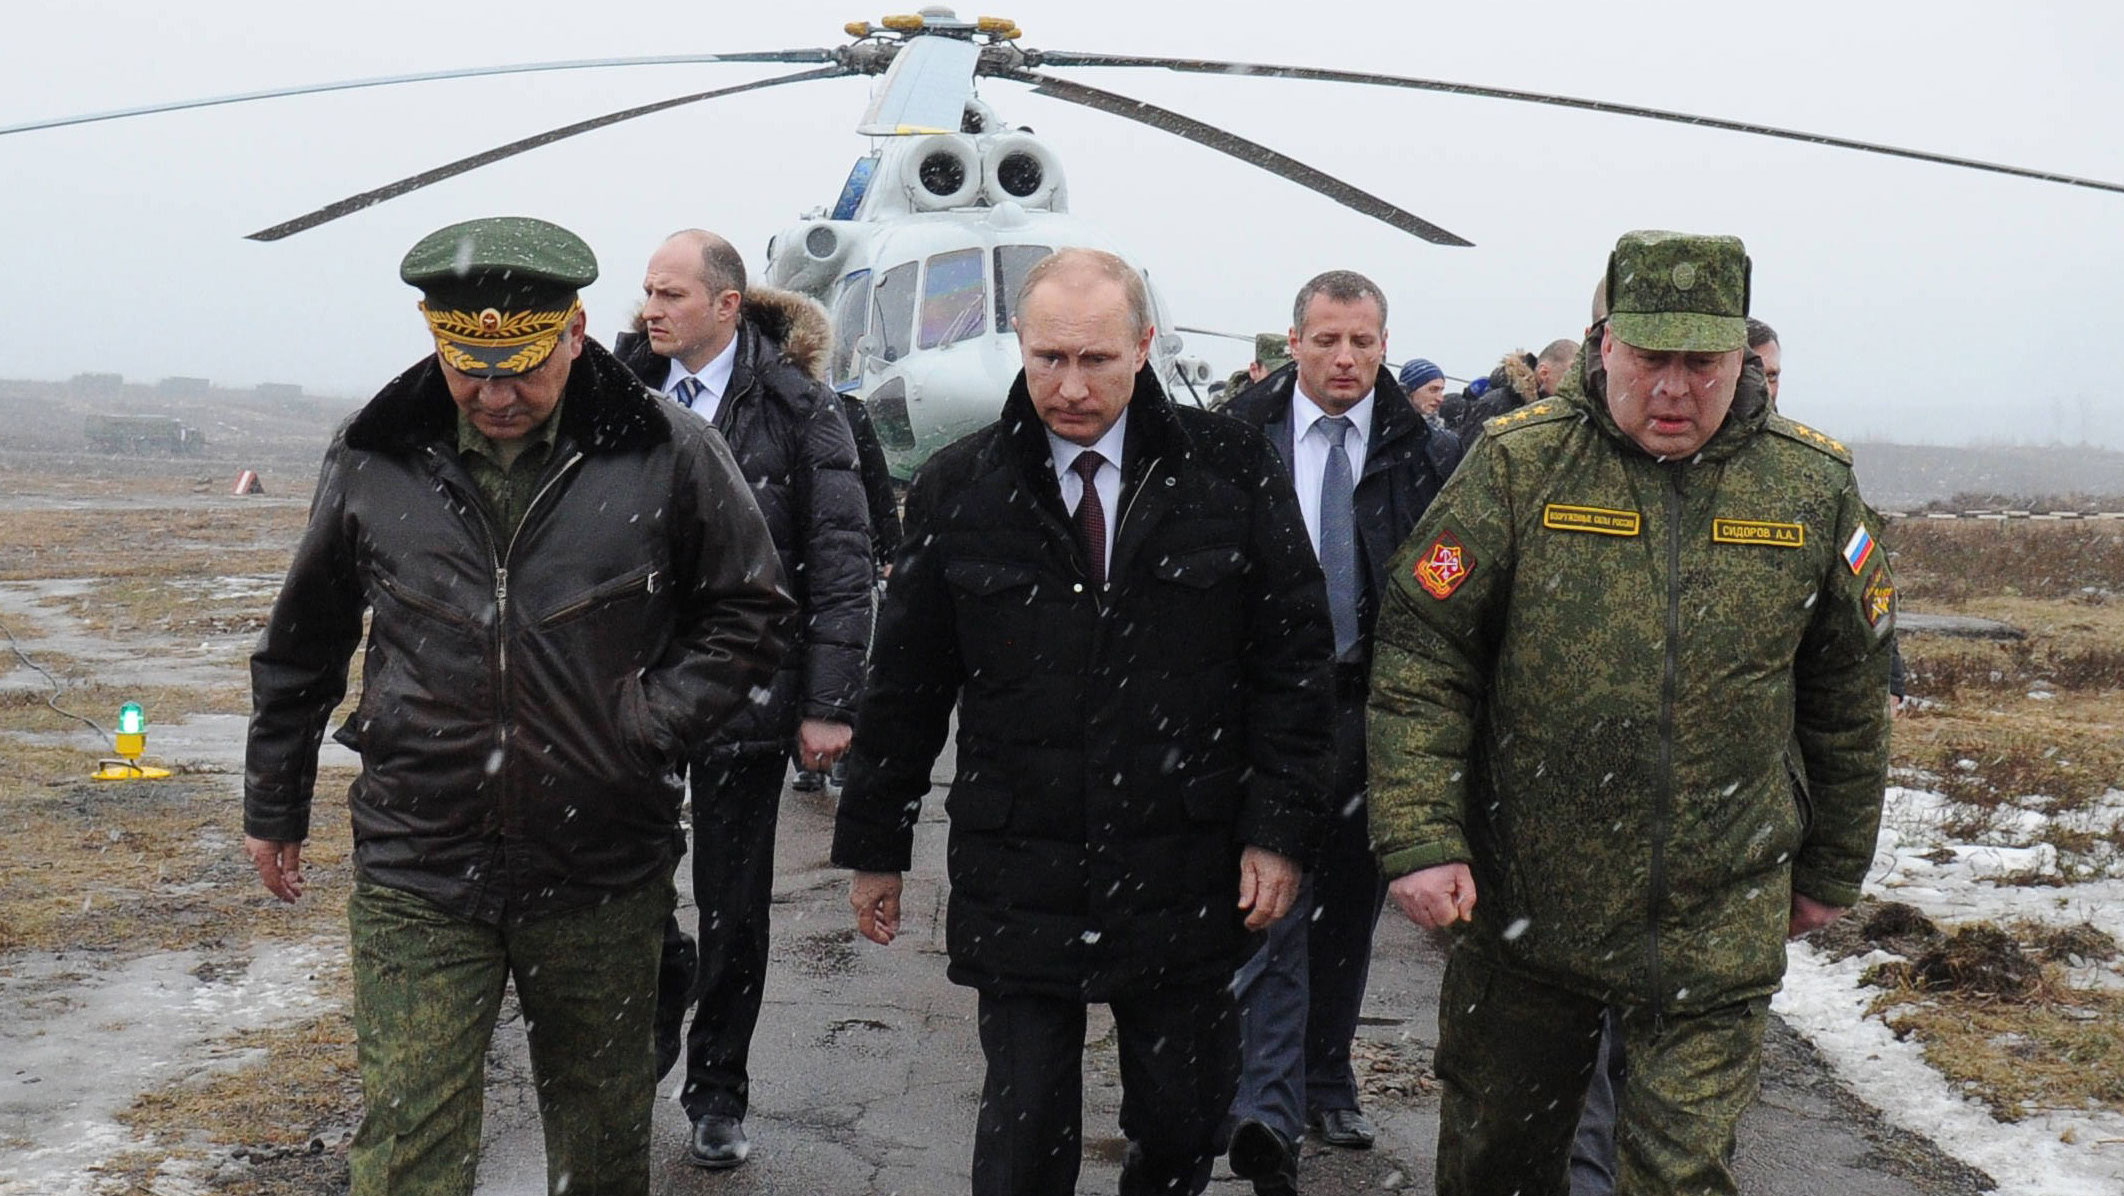 Putin heads off to watch military exercises